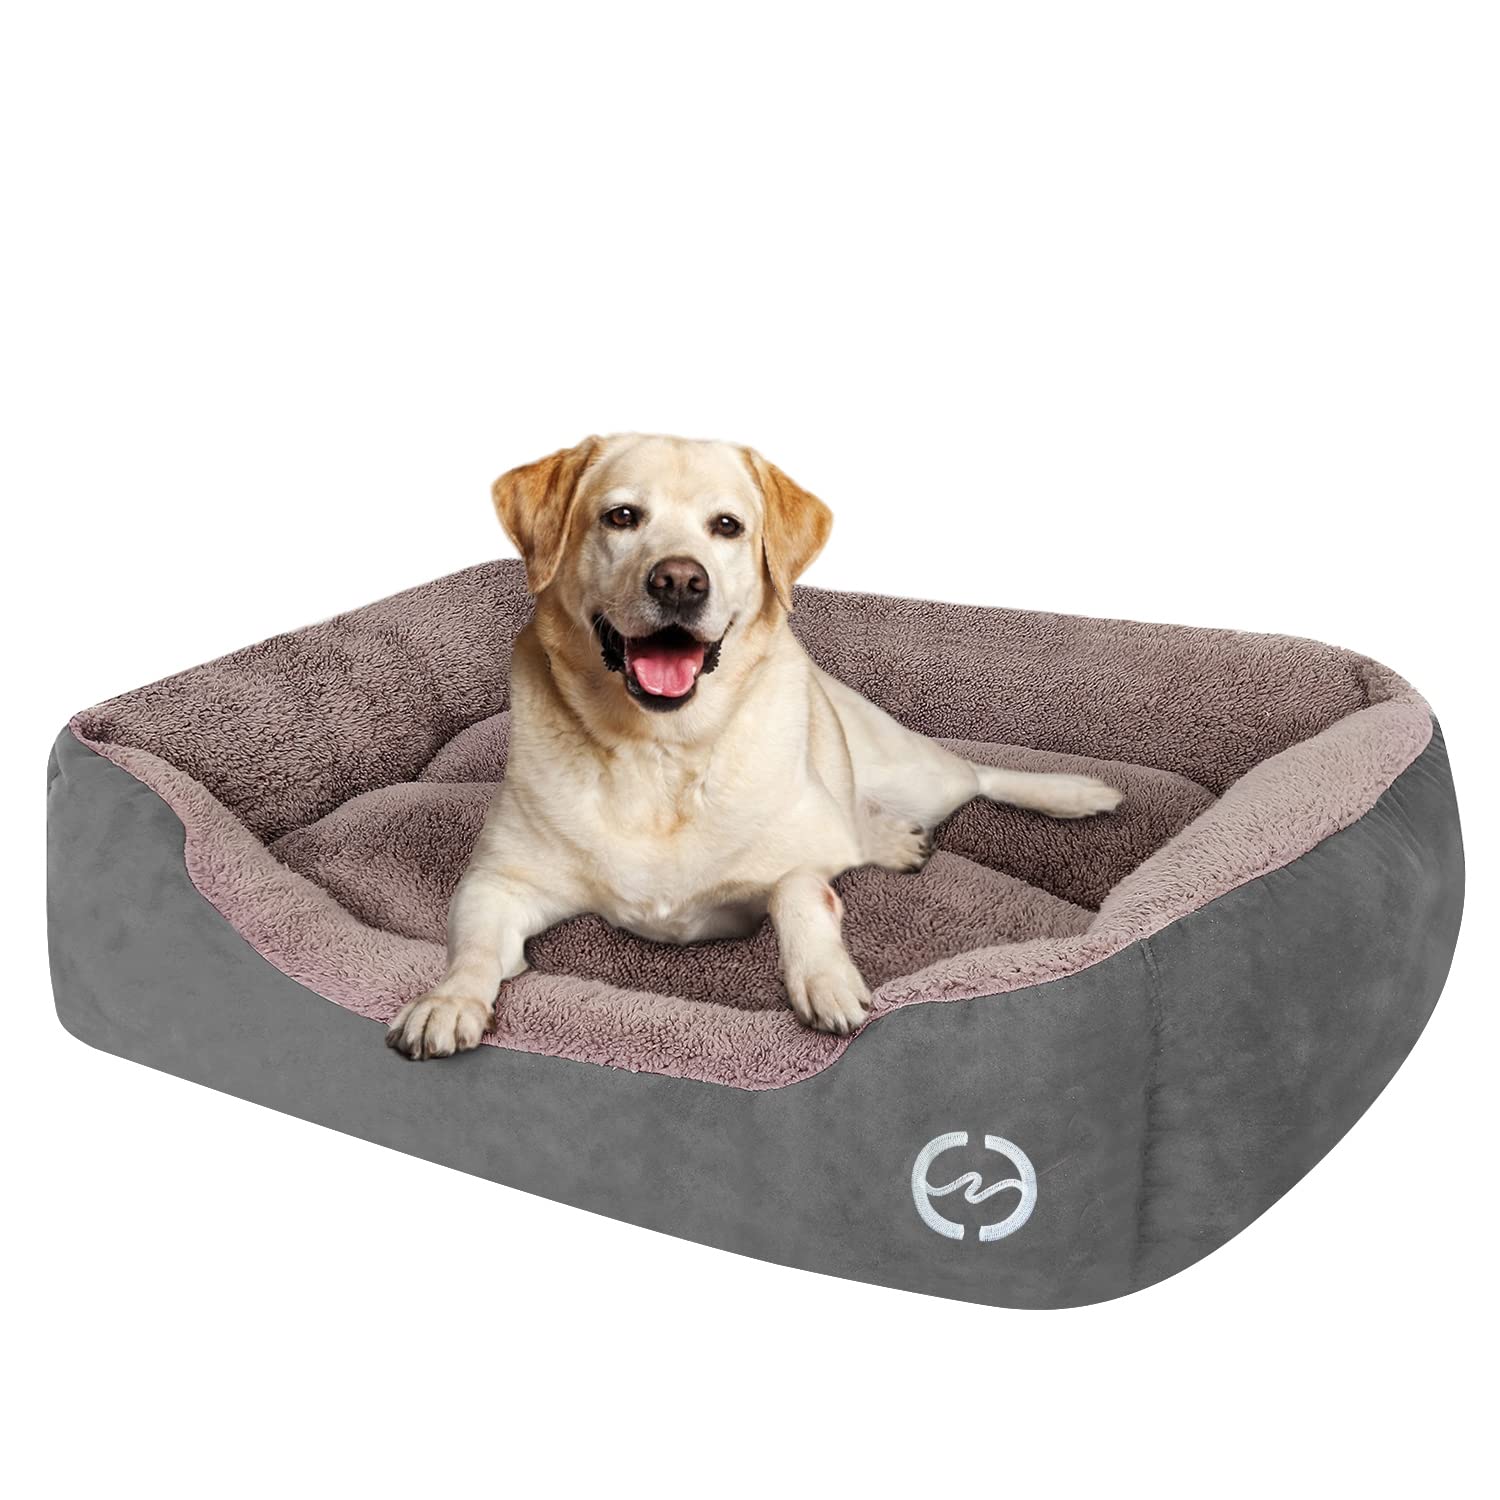 PUPPBUDD Dog Beds for Medium Dogs Rectangle Washable Dog Bed comfortable and Breathable Pet Sofa Warming Orthopedic Dog Bed for 